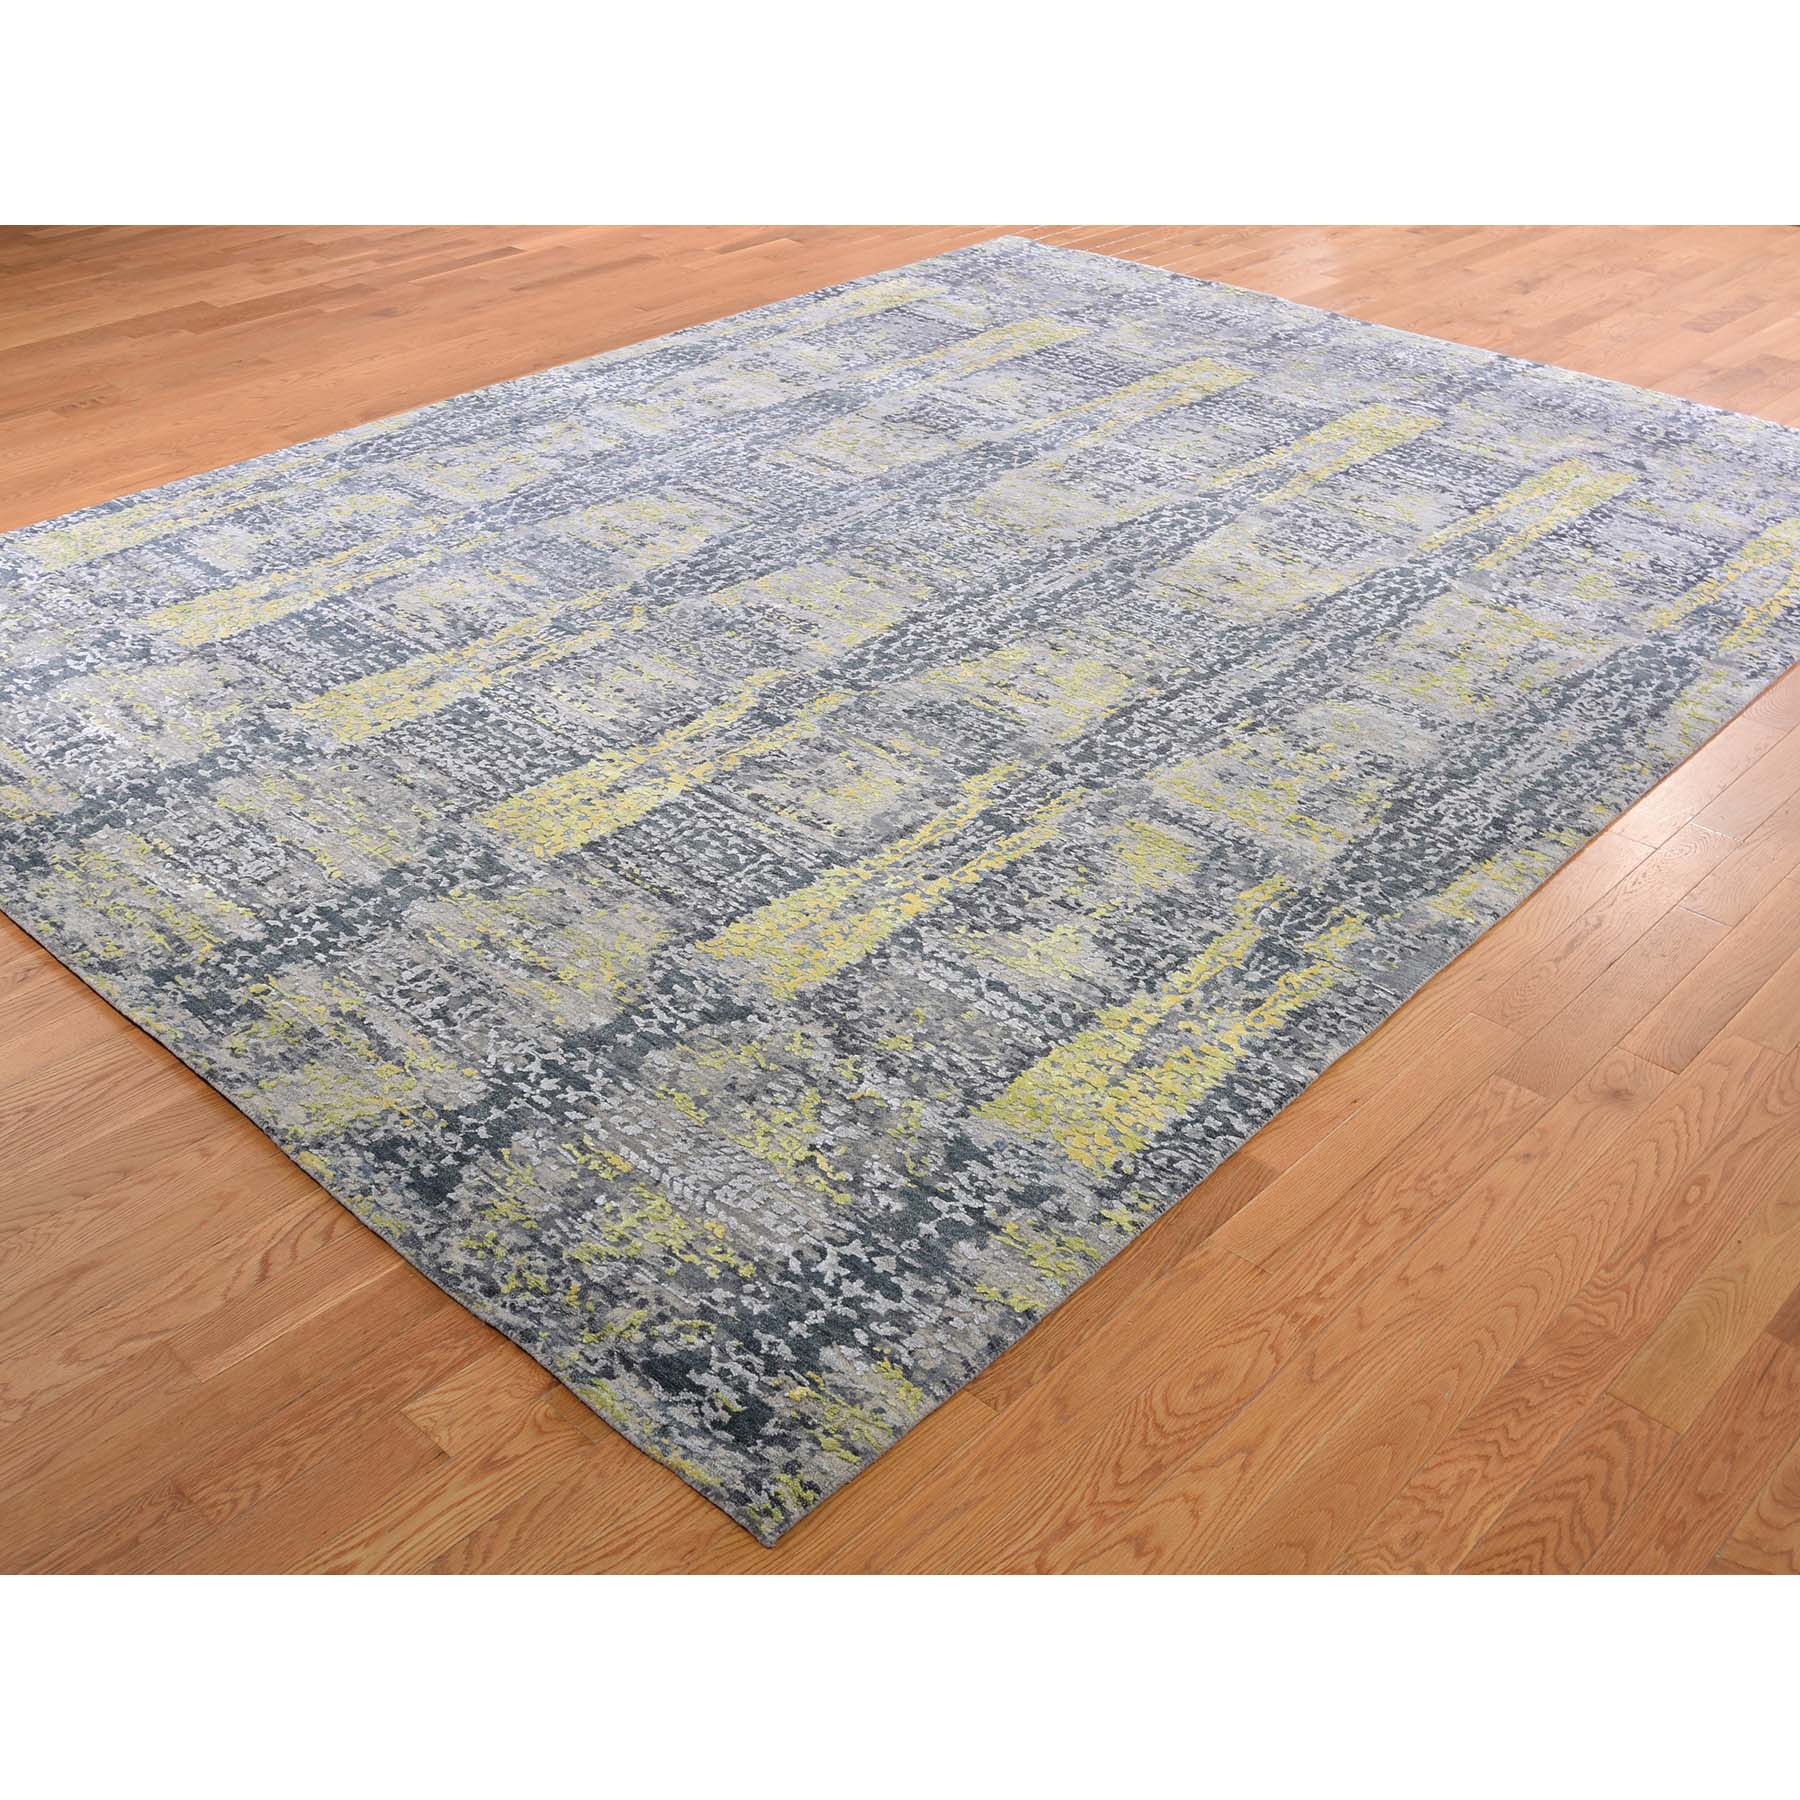 8-10 x11-9  Wool And Silk Abstract Design Hand-Knotted Oriental Rug 